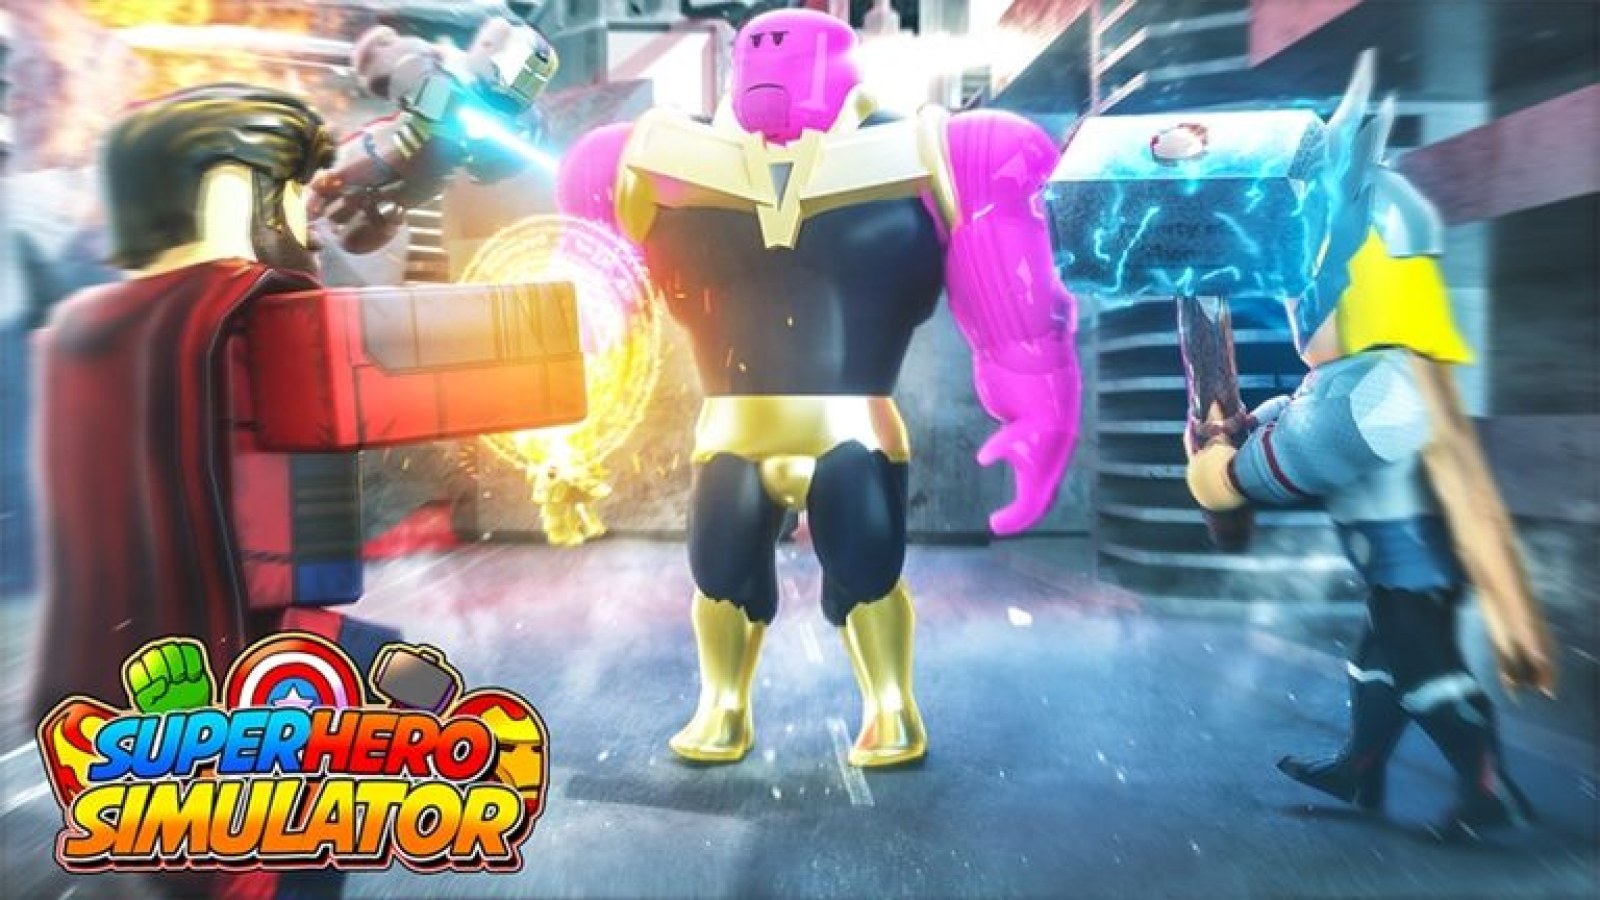 Superhero Simulator Codes All Working Roblox Codes To Get Free Coins - roblox city simulator games